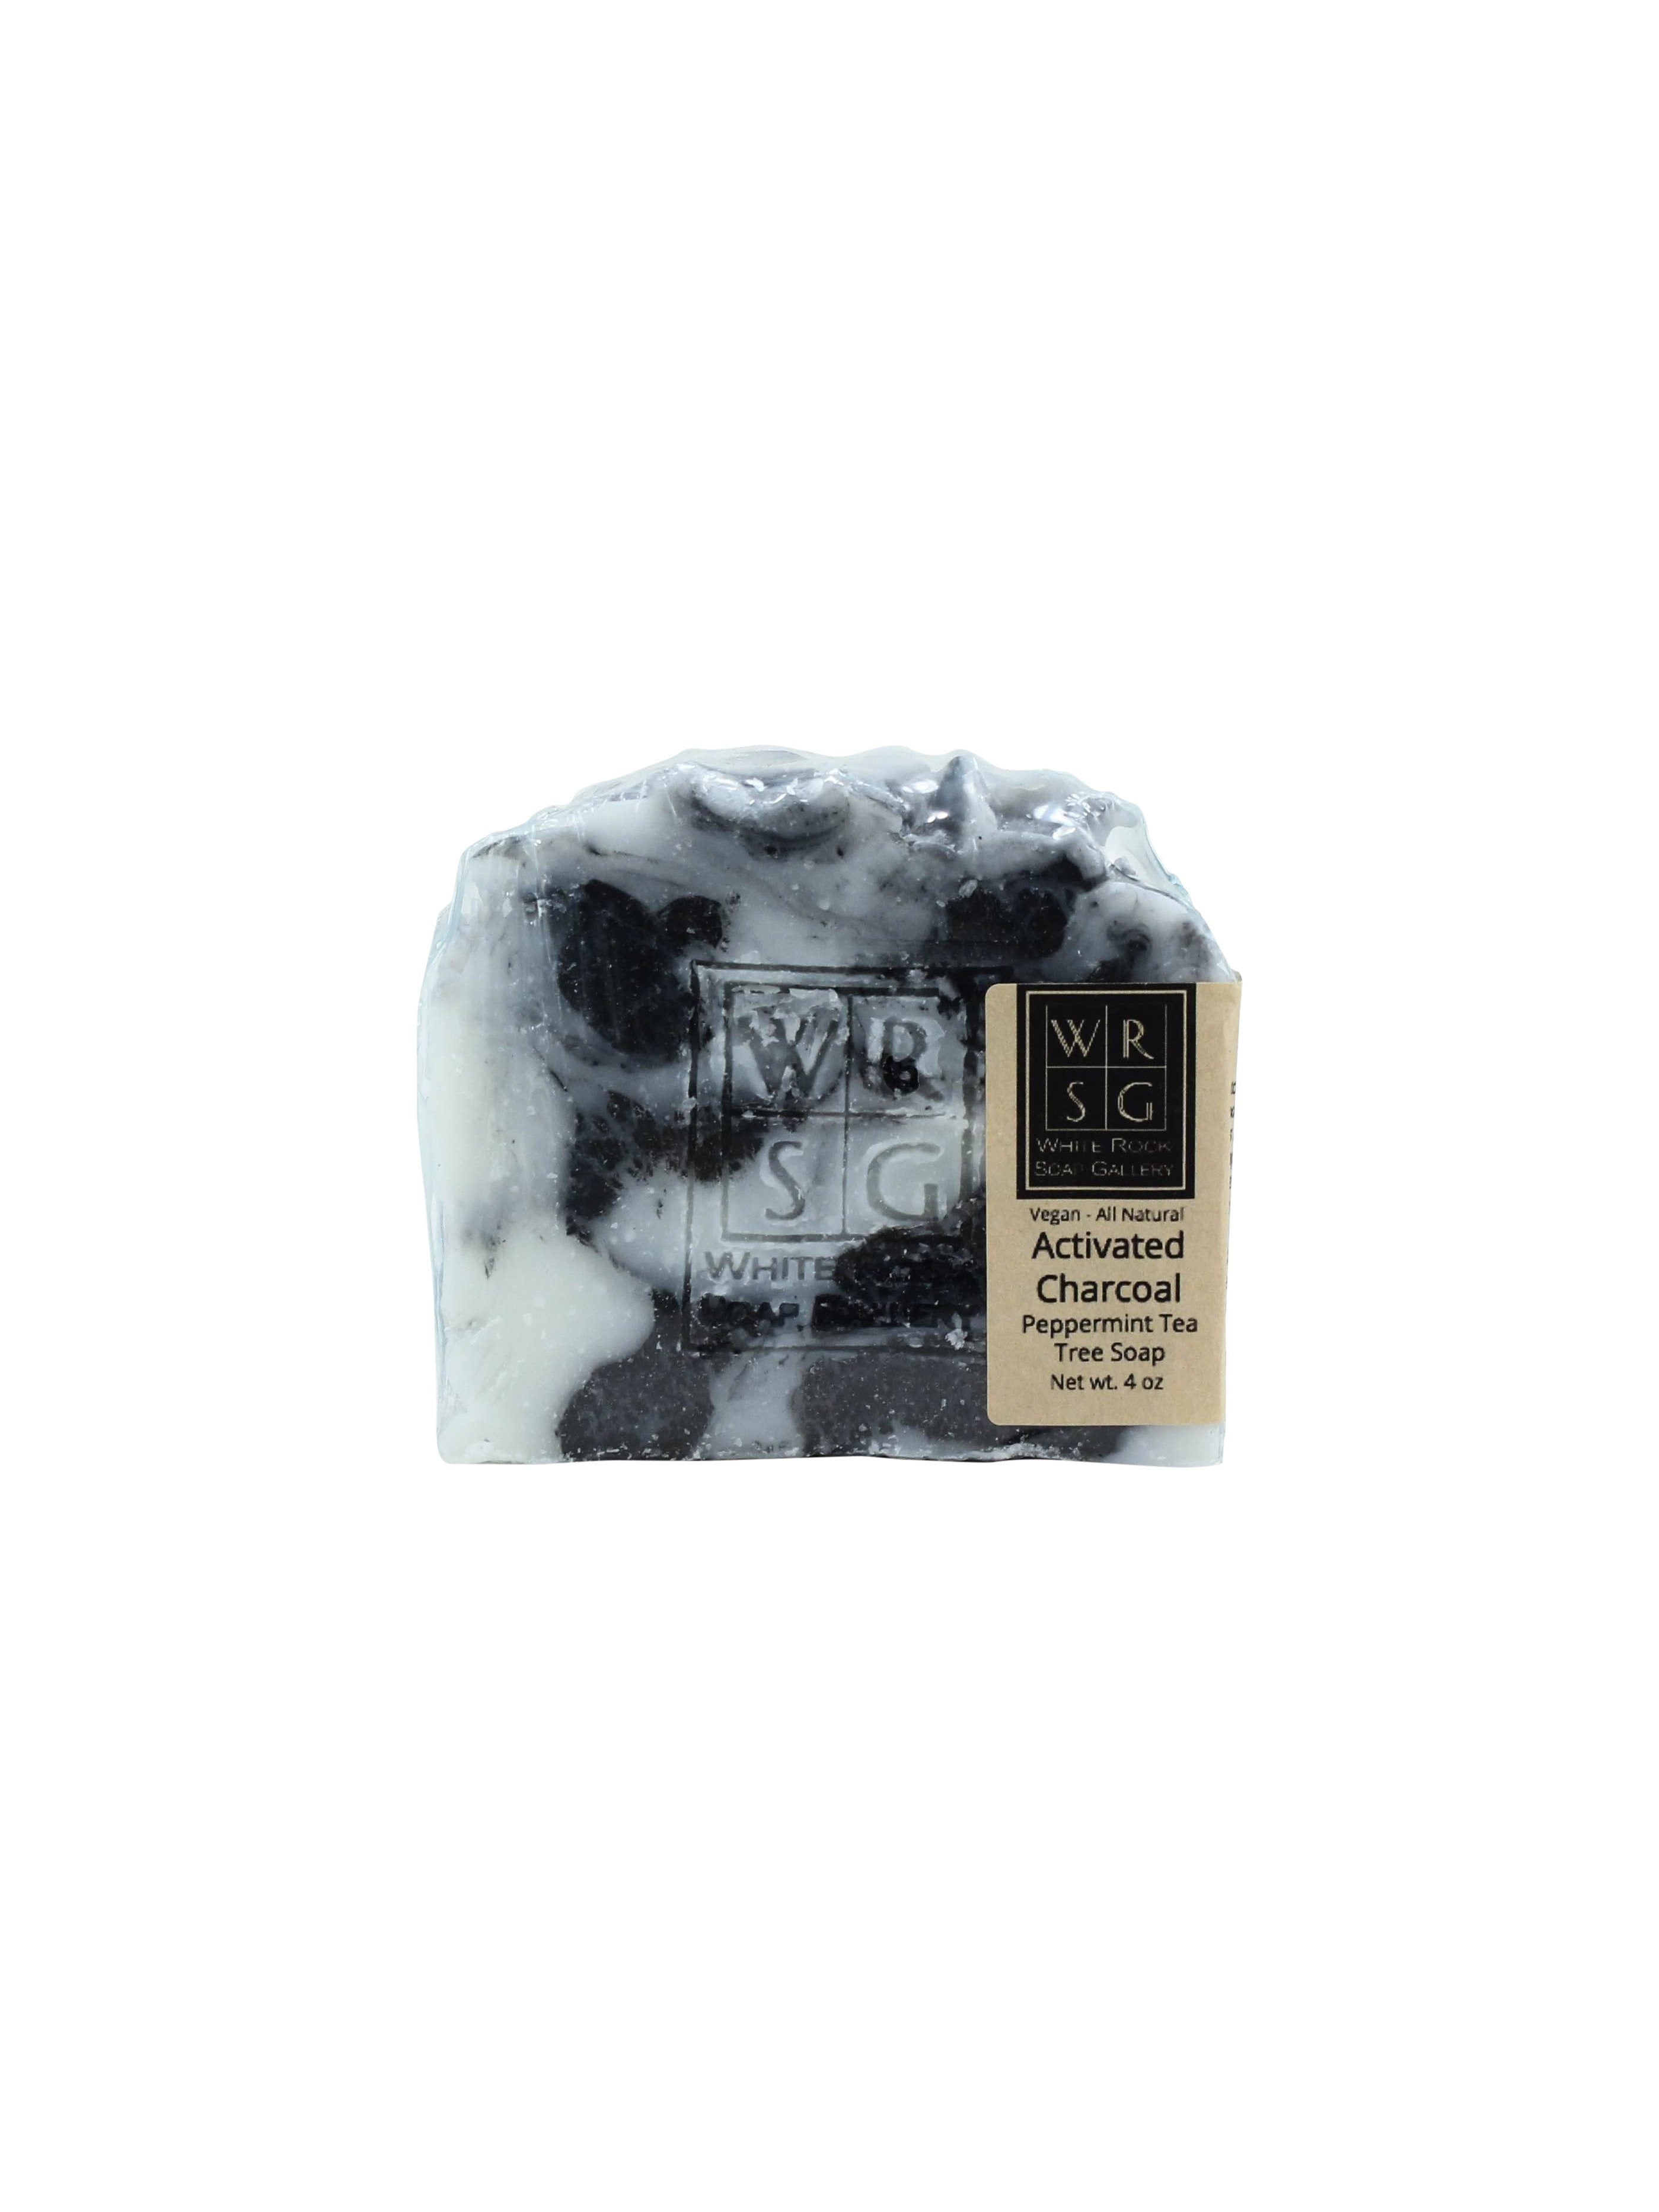 Activated Charcoal with Peppermint Tea Tree Soap